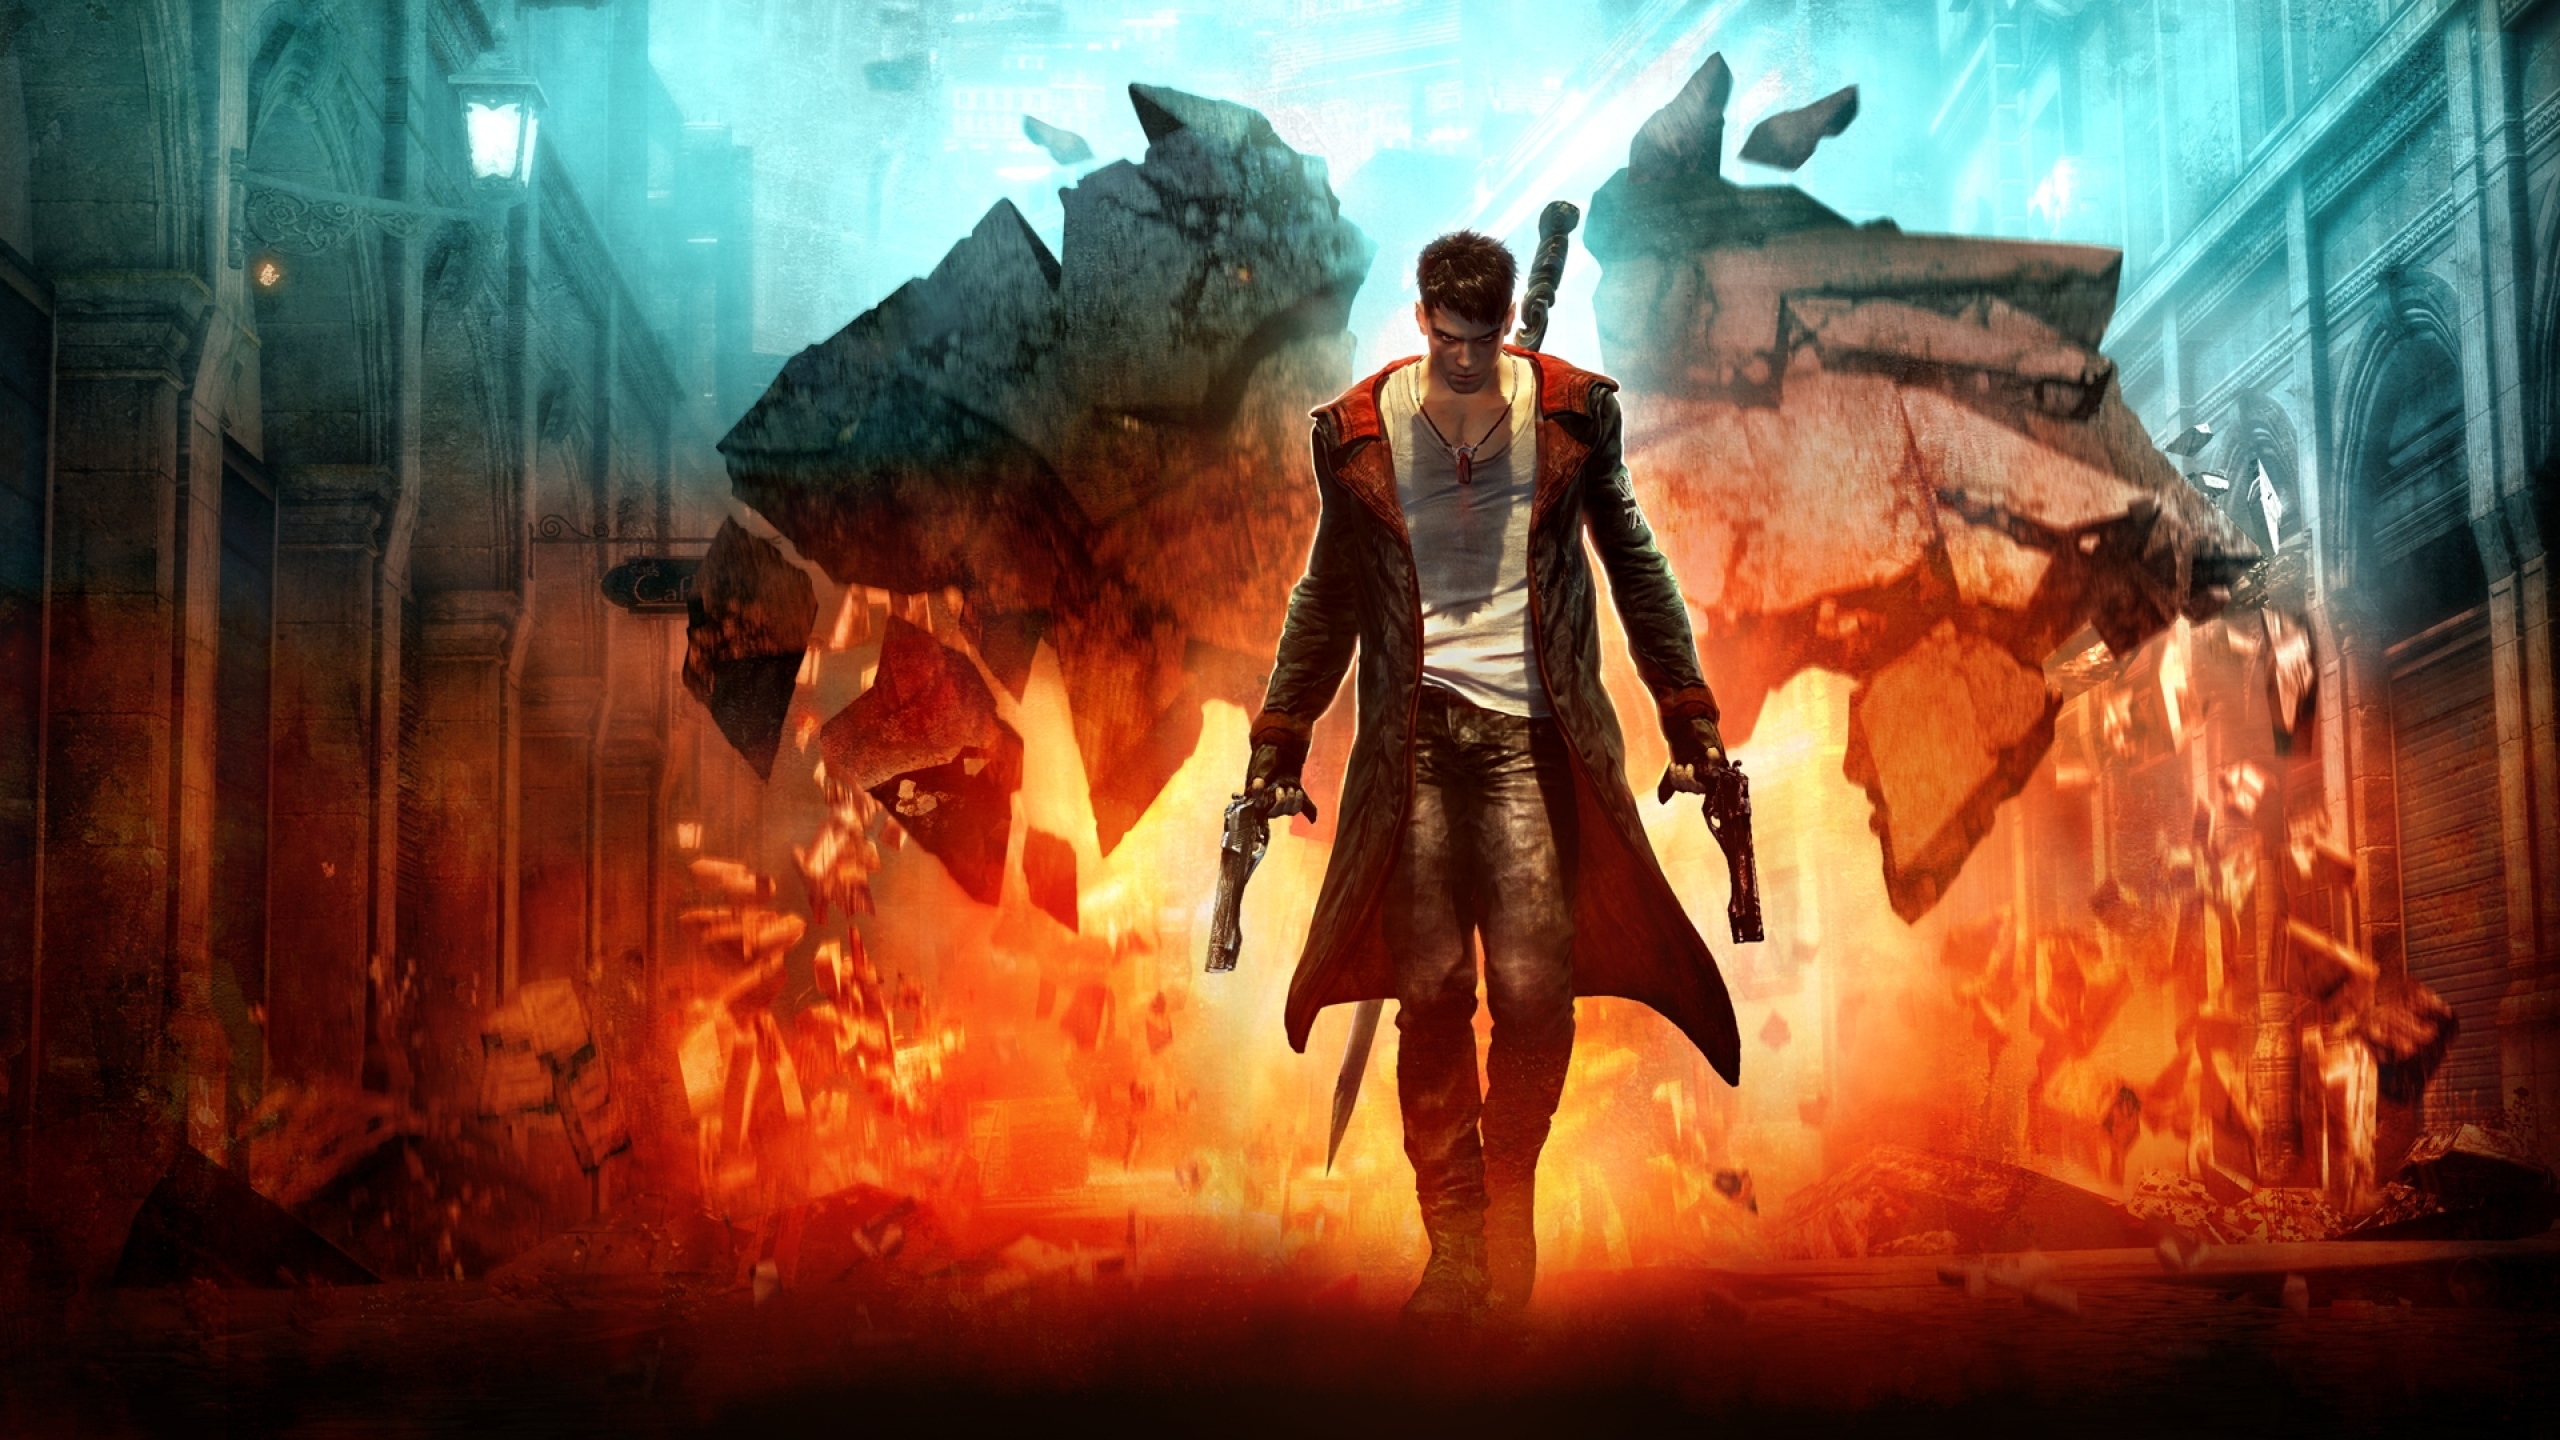 Download Wallpapers, Download 2560x1440 guns devil devil may cry 5 ...